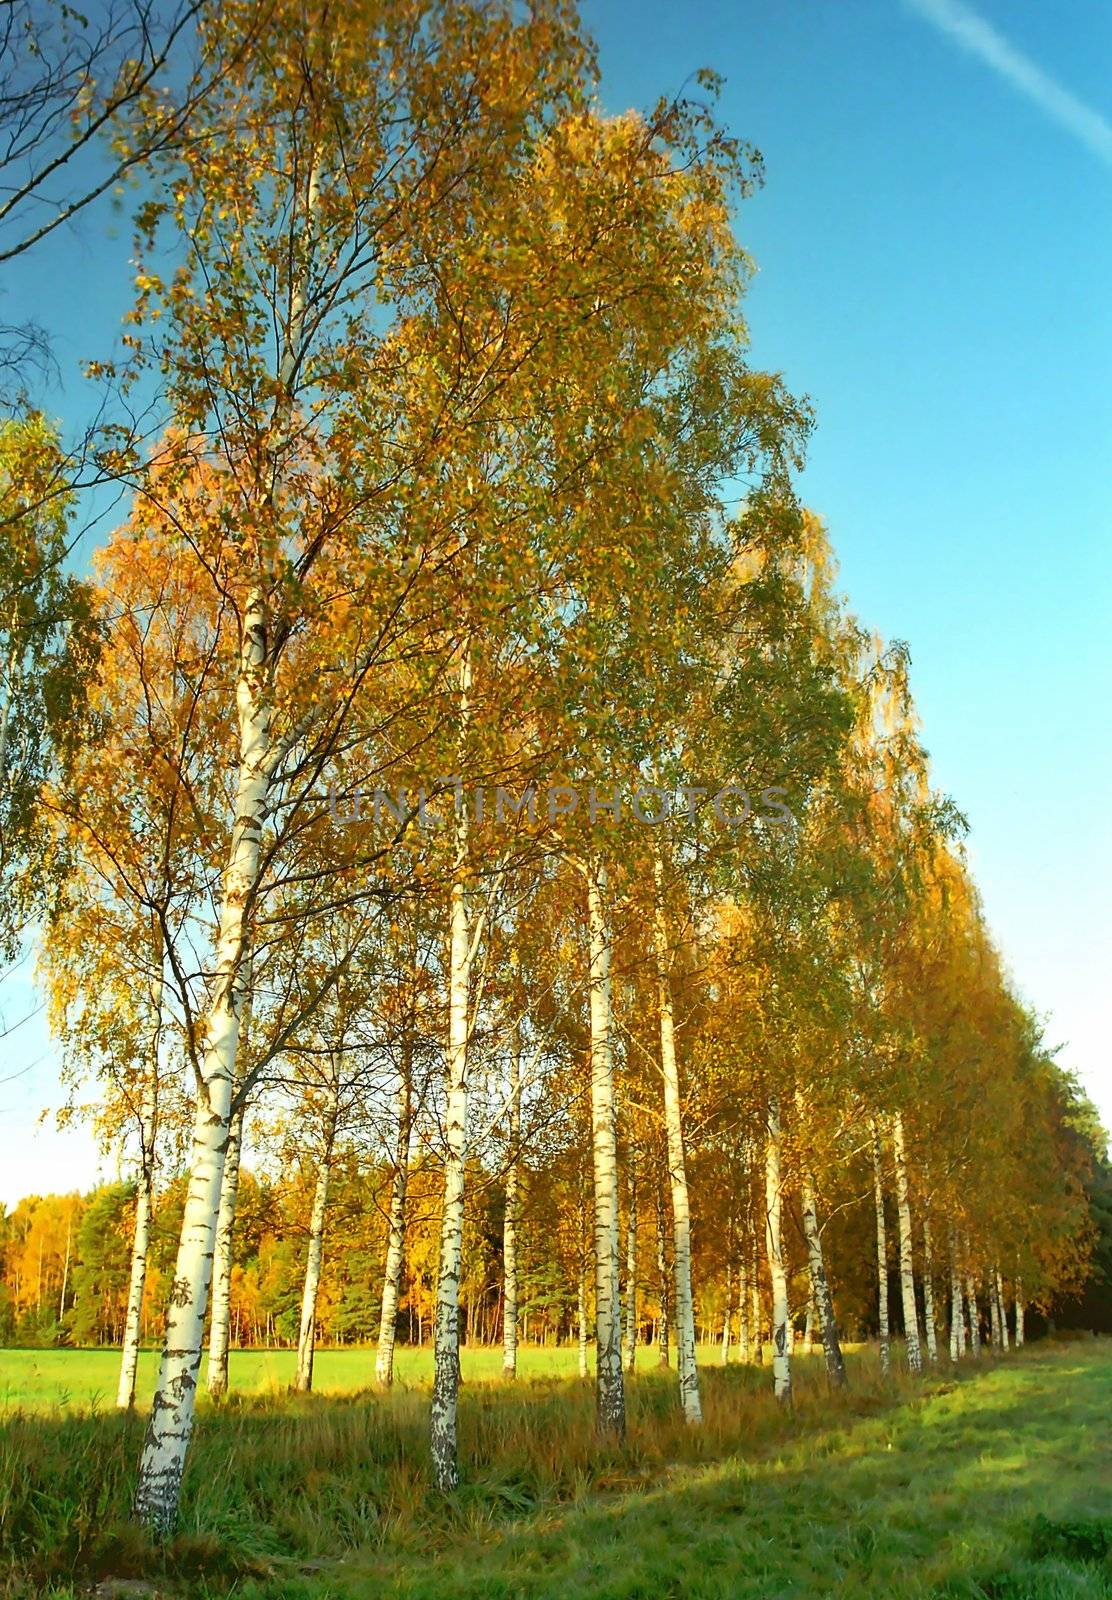 Birches alley in autumn colors against blue sky